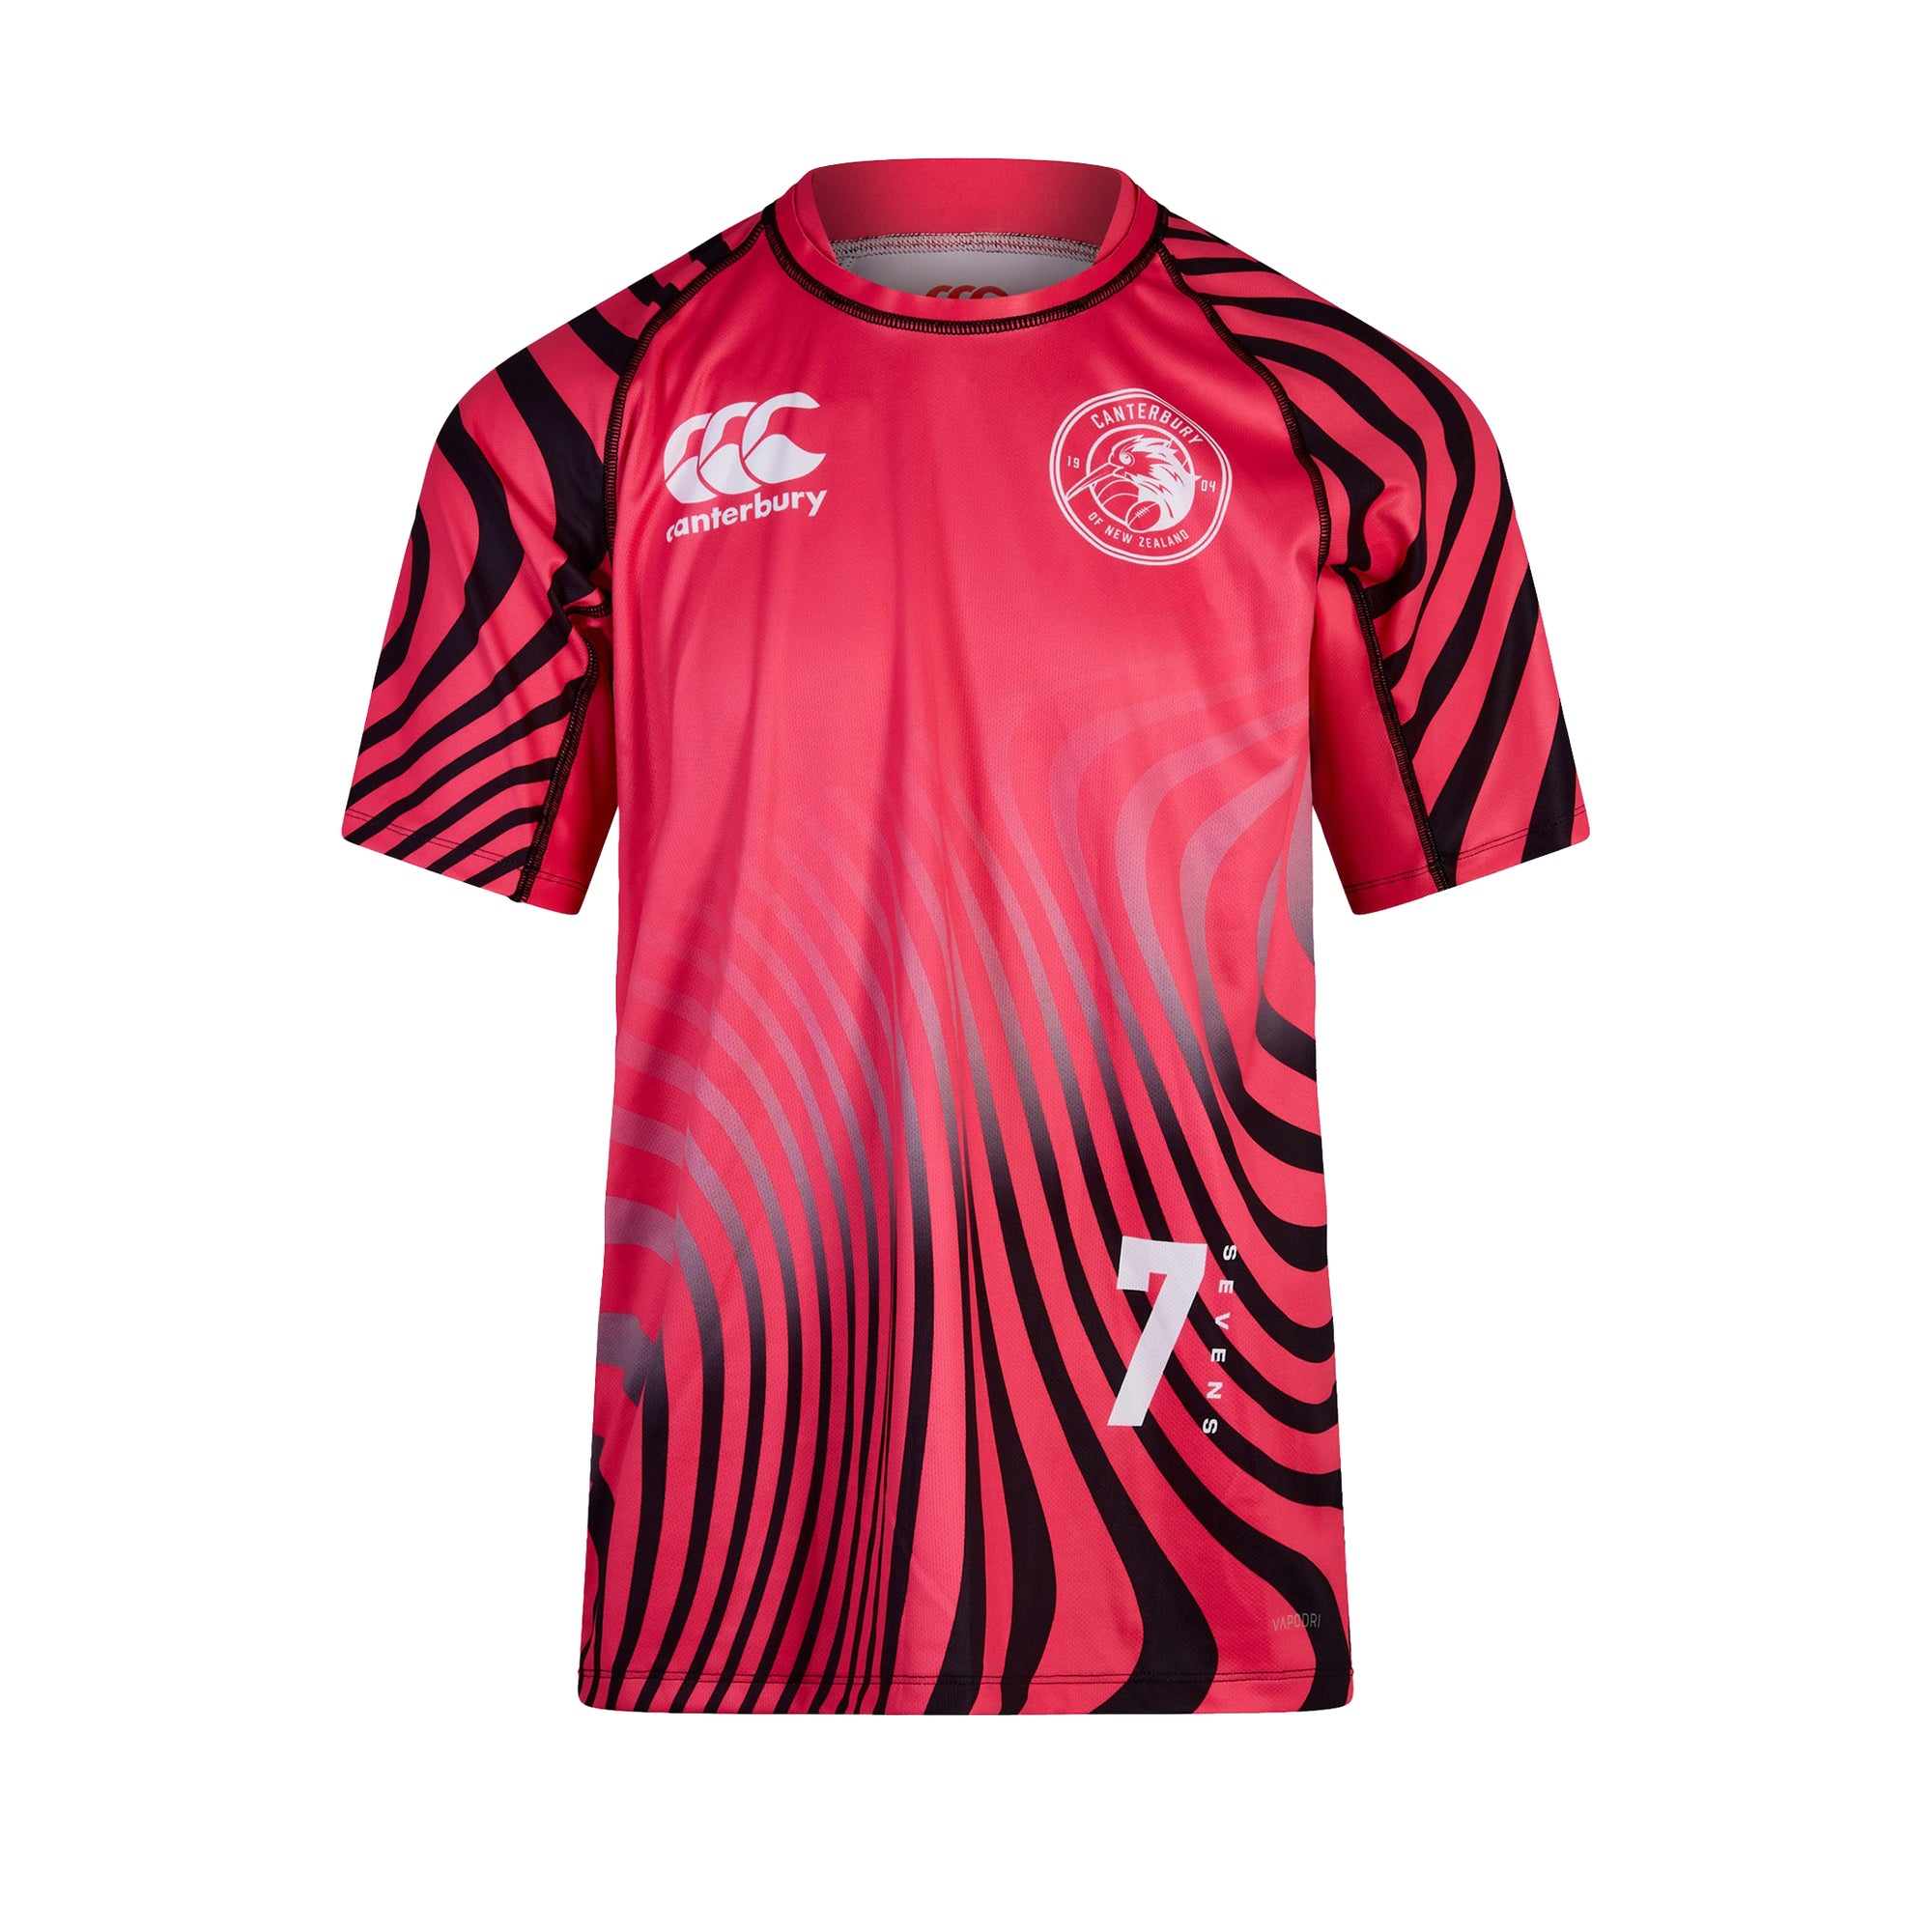 Customizable Canterbury CCC MTO Quality Raiona Rugby Shirt Available in Men's, Women's, and Youth Sizing XS - 4XL 